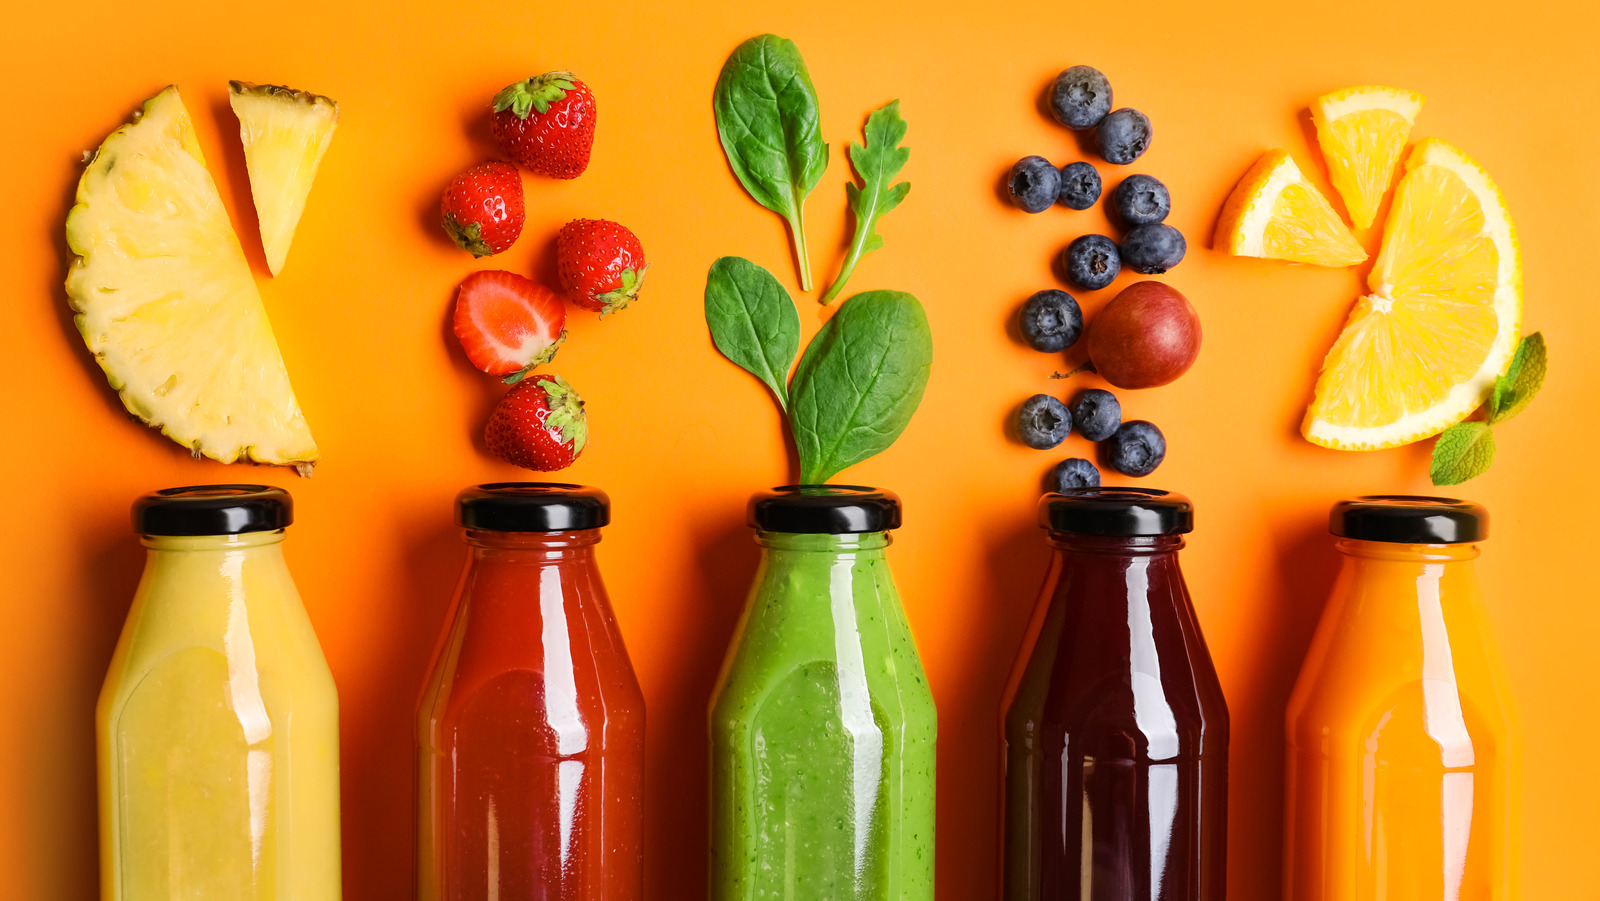 Ask a doctor: Is juicing healthy?